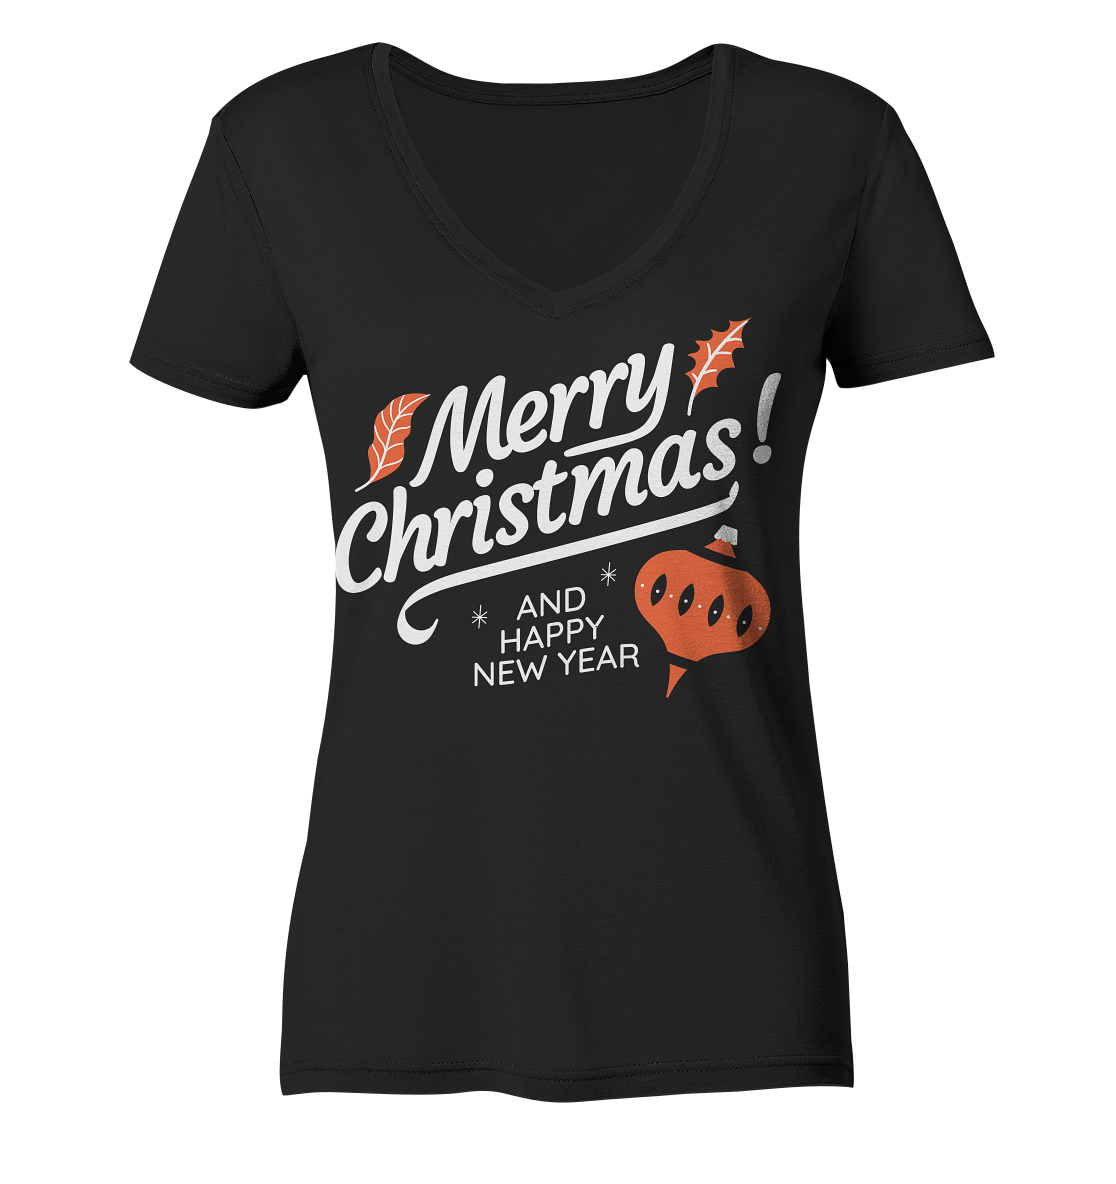 Merry Christmas and Happy New Year, Merry Christmas and Happy New Year - Ladies V-Neck Shirt